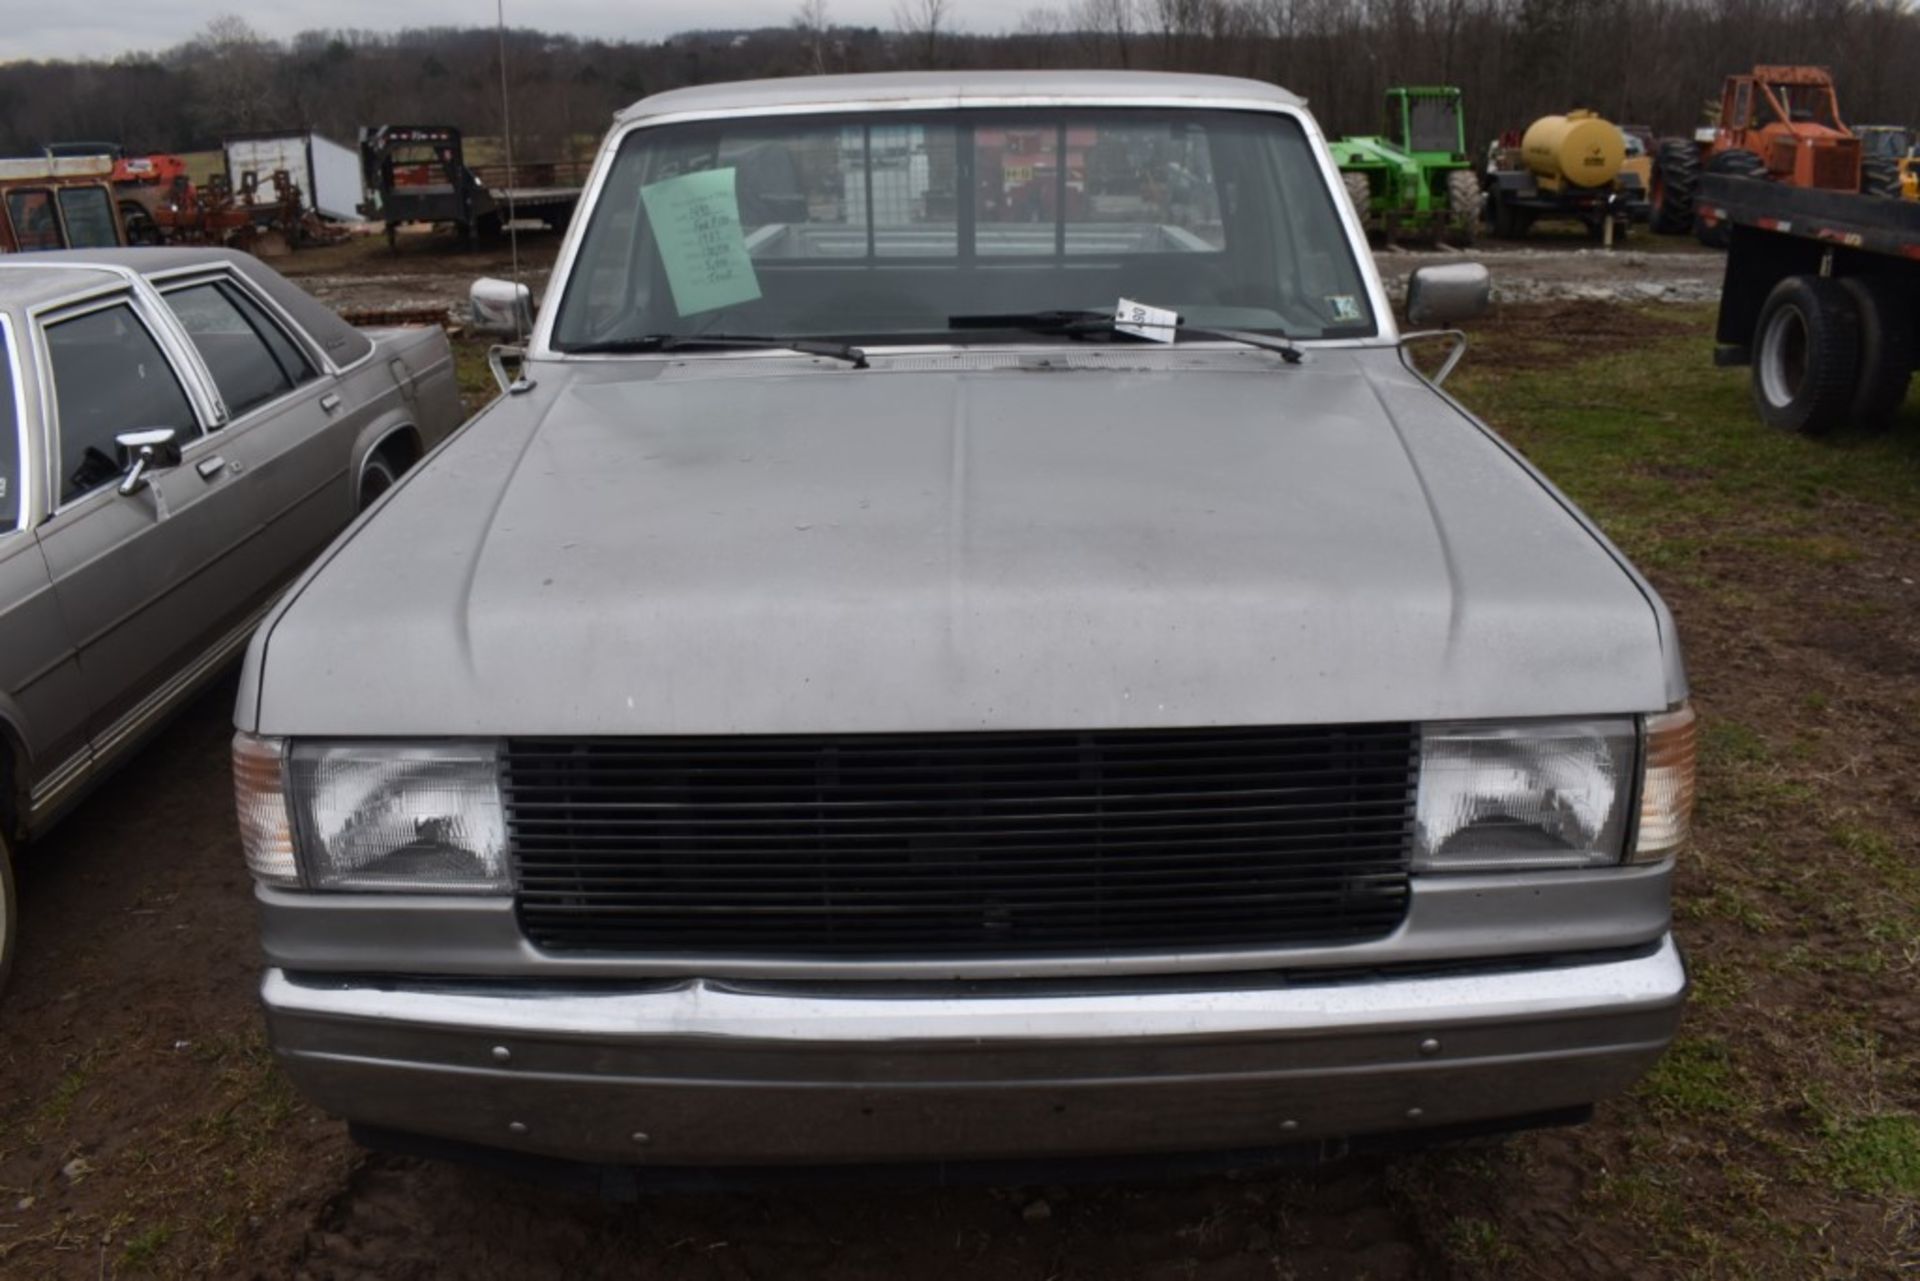 1987 Ford F-150 Truck - Image 3 of 36